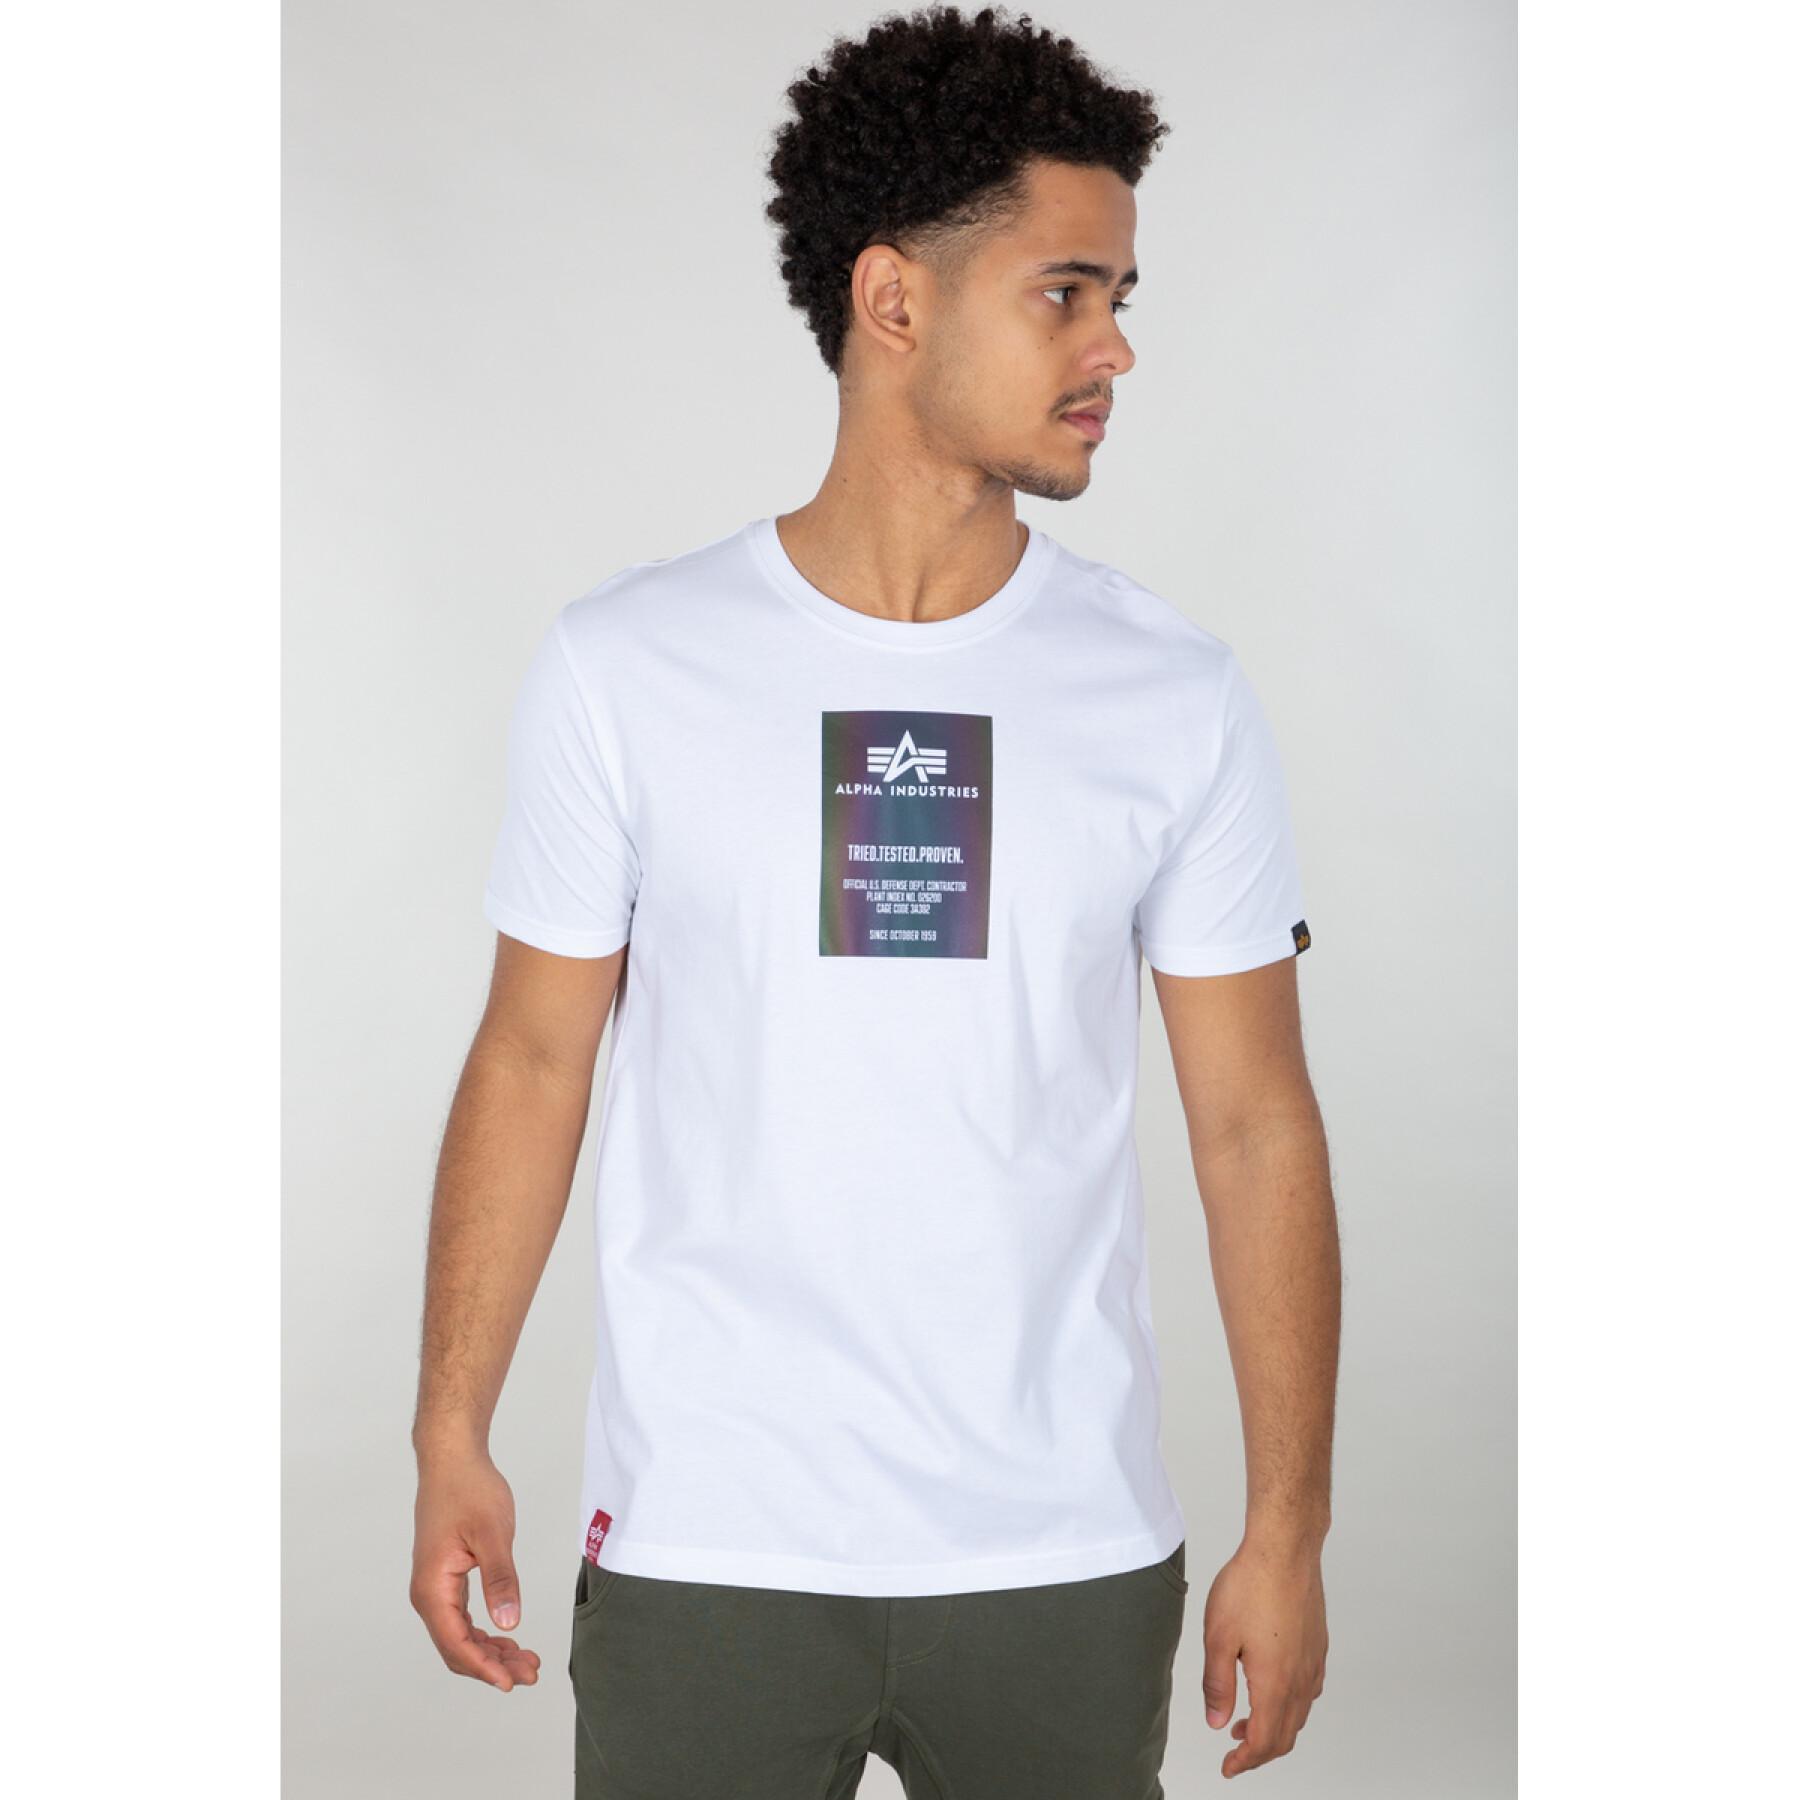 T-shirt Alpha Industries Rainbow Man and T-shirts - Lifestyle Reflective shirts - - Label Polo